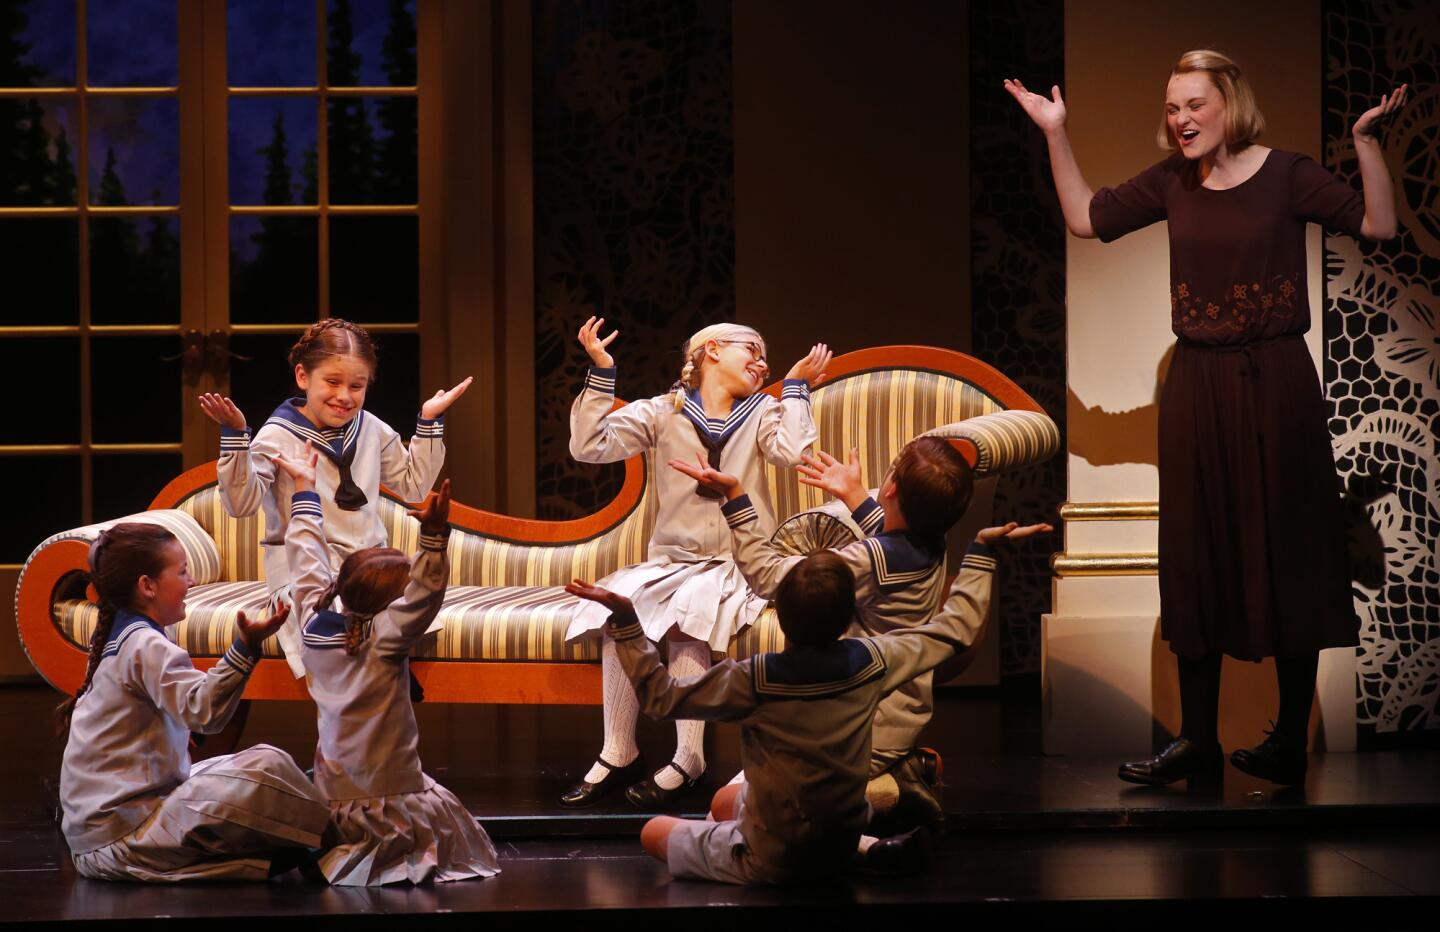 Kerstin Anderson, right, as Maria performs "Do-Re-Mi" with the Von Trapp children in "The Sound of Music."